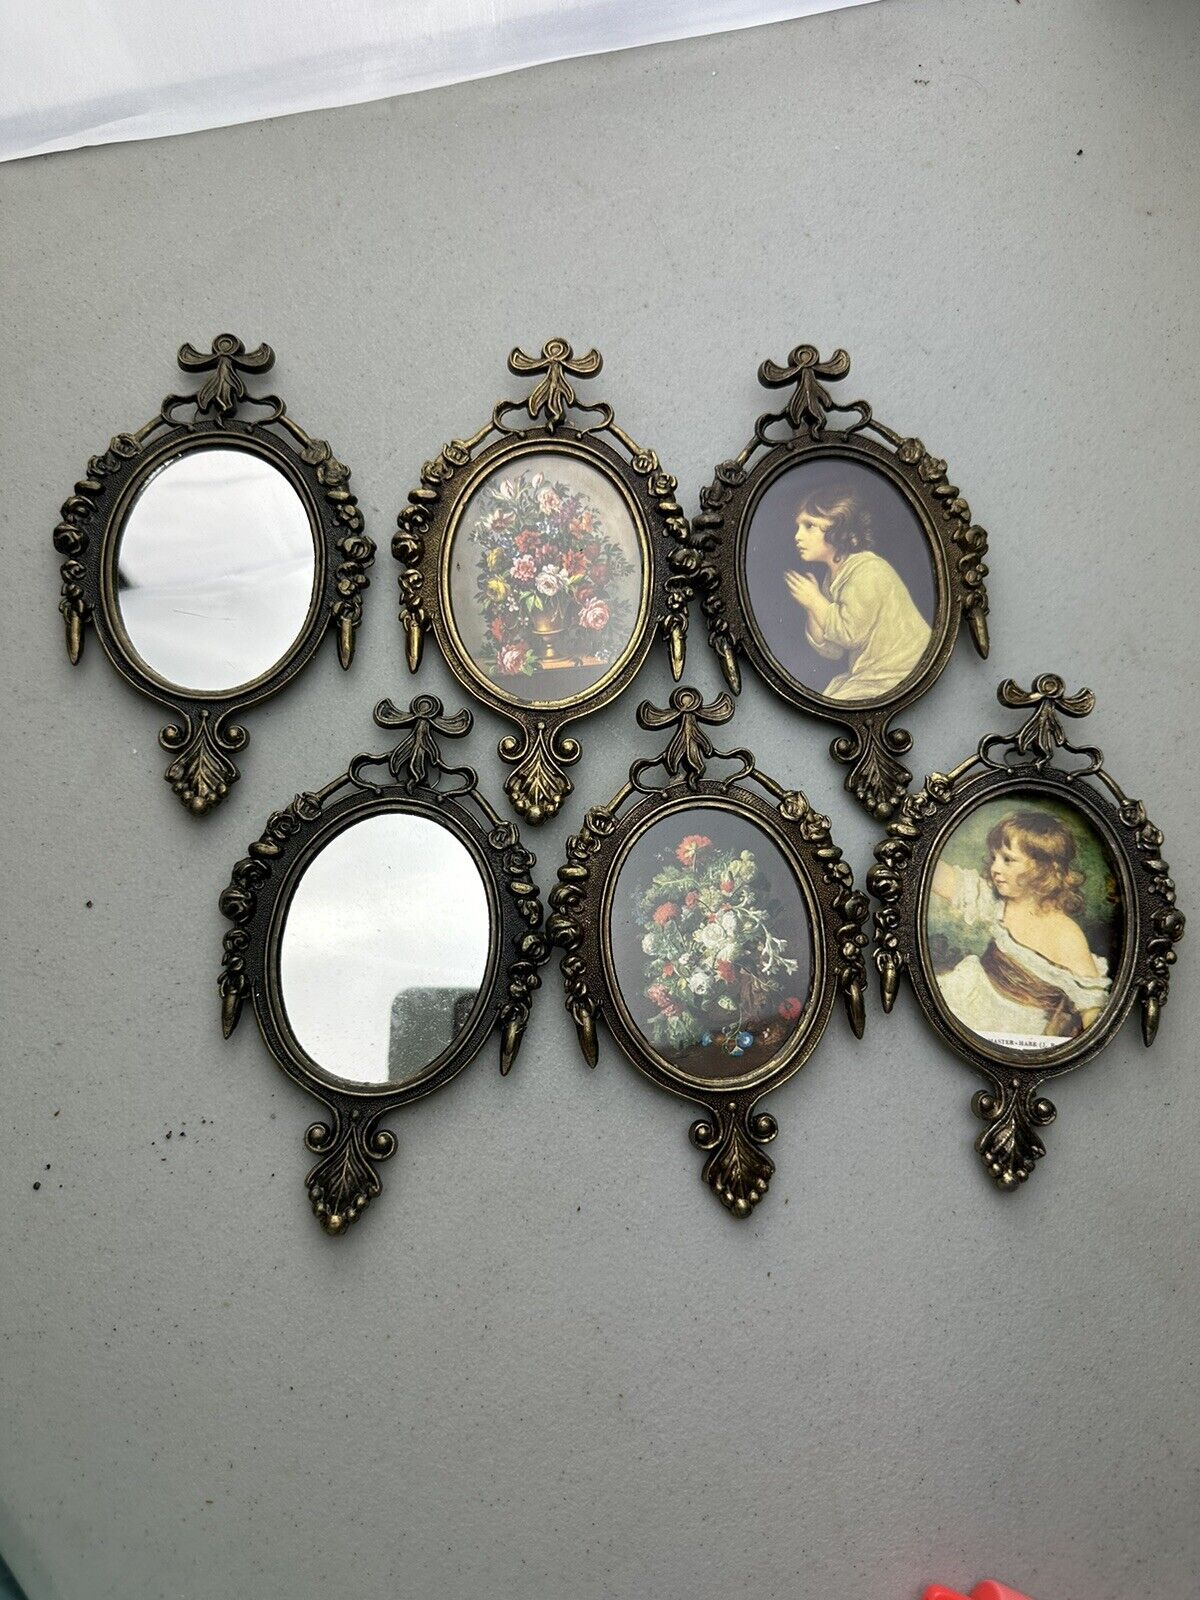 Vtg Small 6.5” Ornate Brass Oval Frames Mirror Picture Lot Of 6 Made in Italy